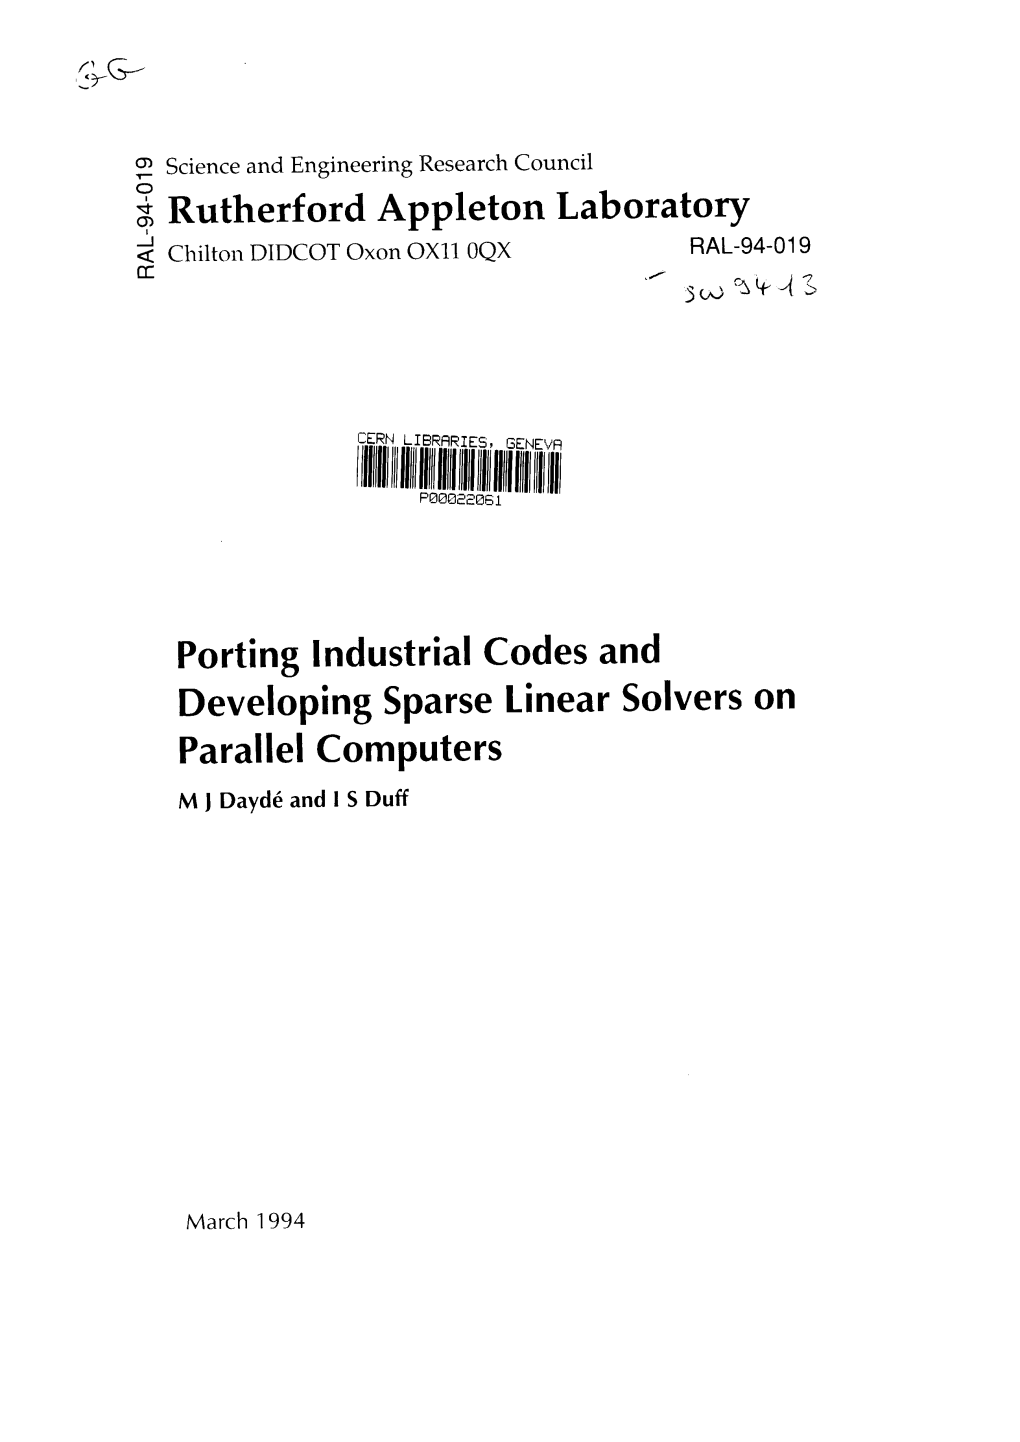 Porting Industrial Codes and Developing Sparse Linear Solvers on Parallel Computers